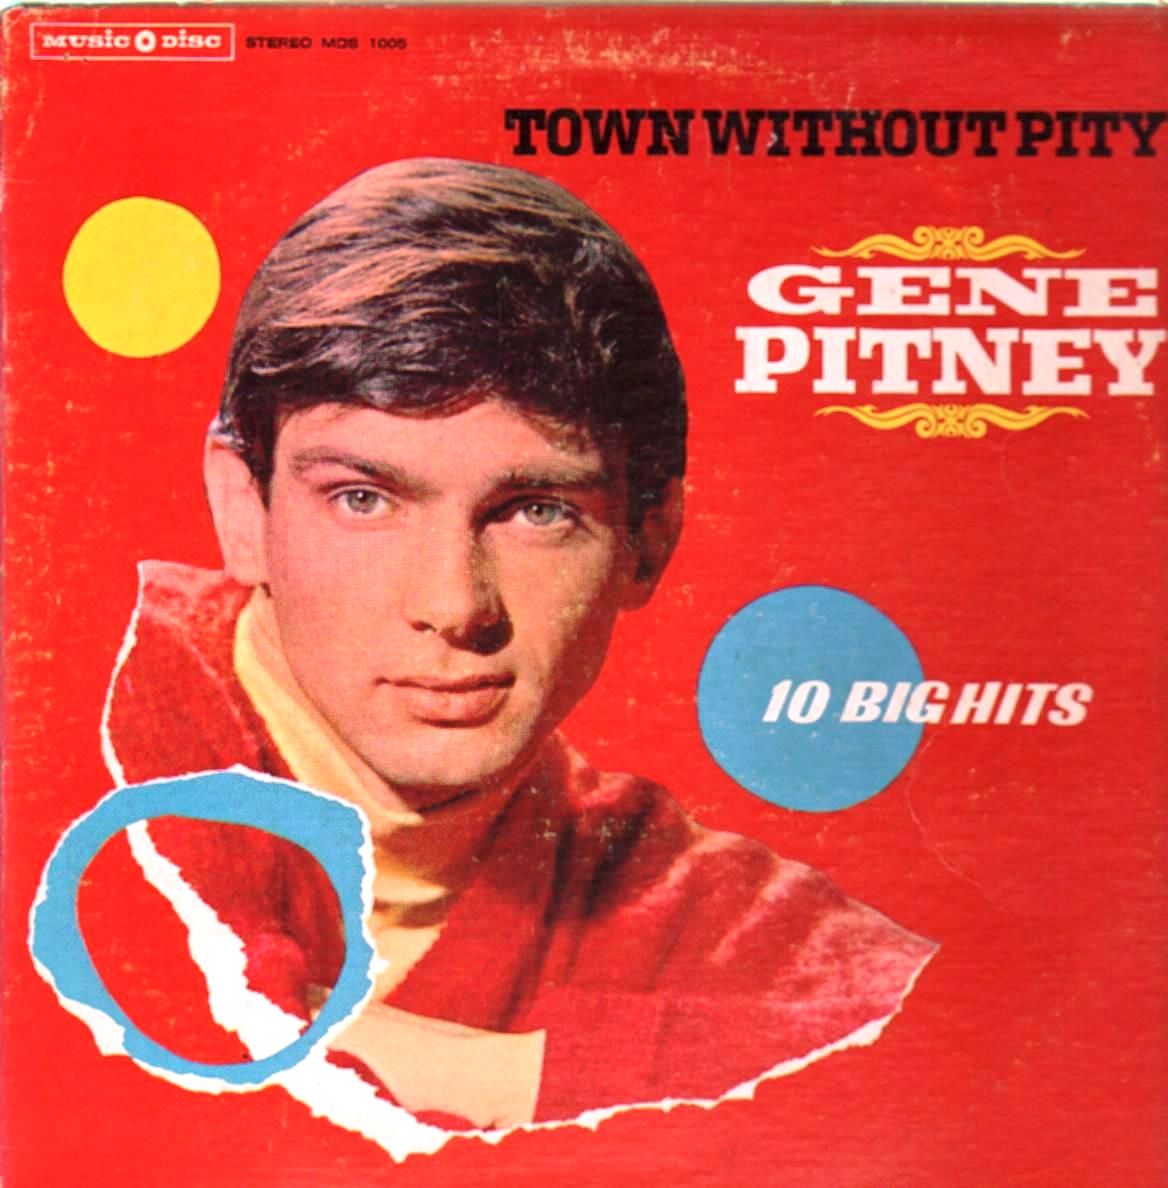 Curiously, Pitney only wrote one of his own singles, "(I Wanna) Love M...